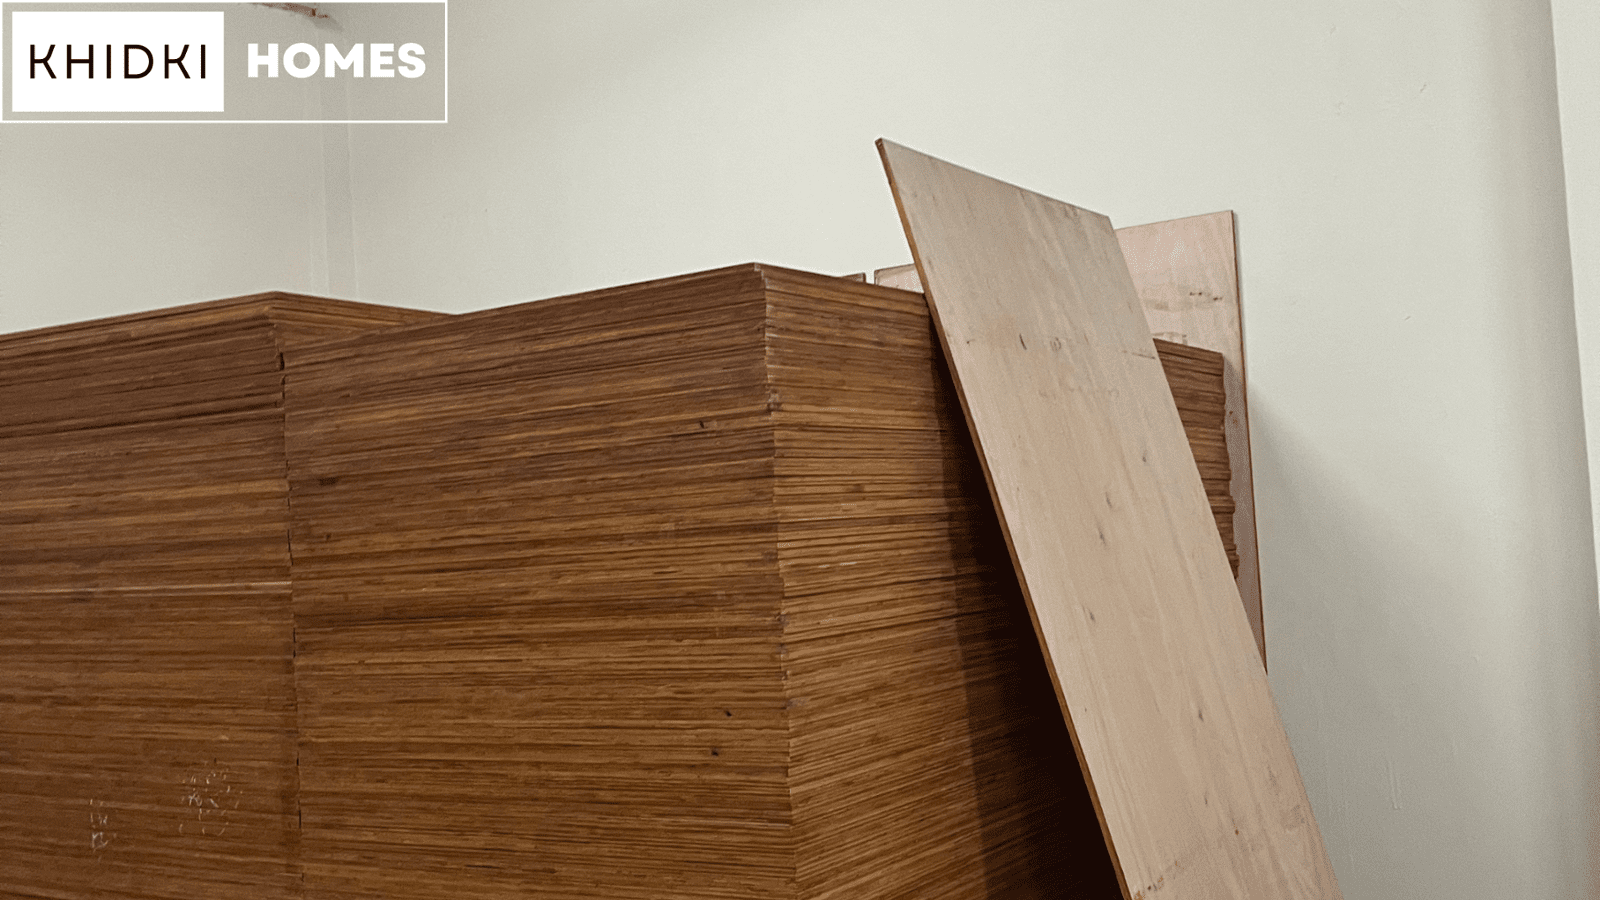 wholesale plywood Shop in Bangalore, Plywood Dealers In Bangalore